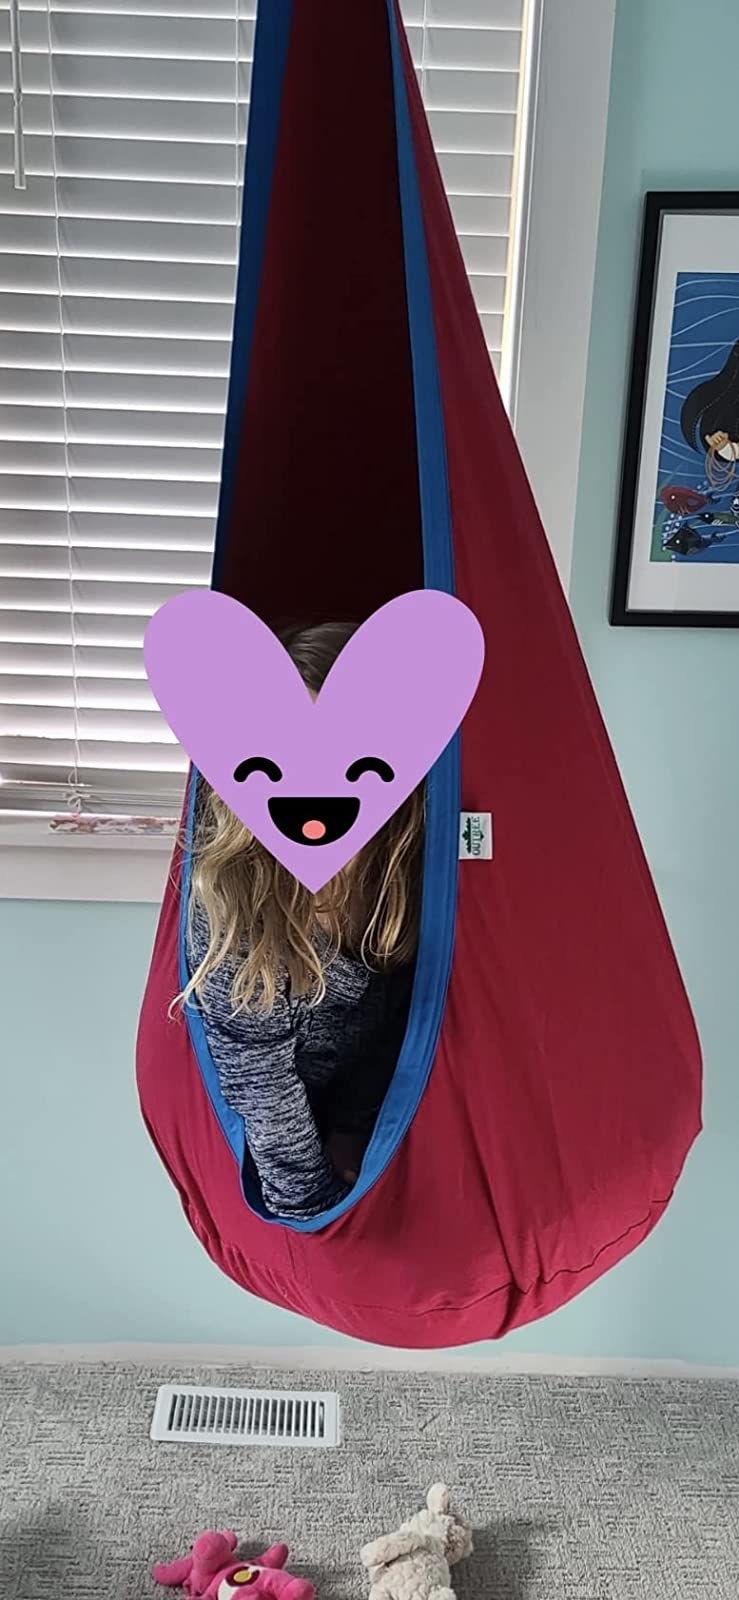 reviewer photo of their kid (with a heart graphic covering their face) in a hanging hammock chair